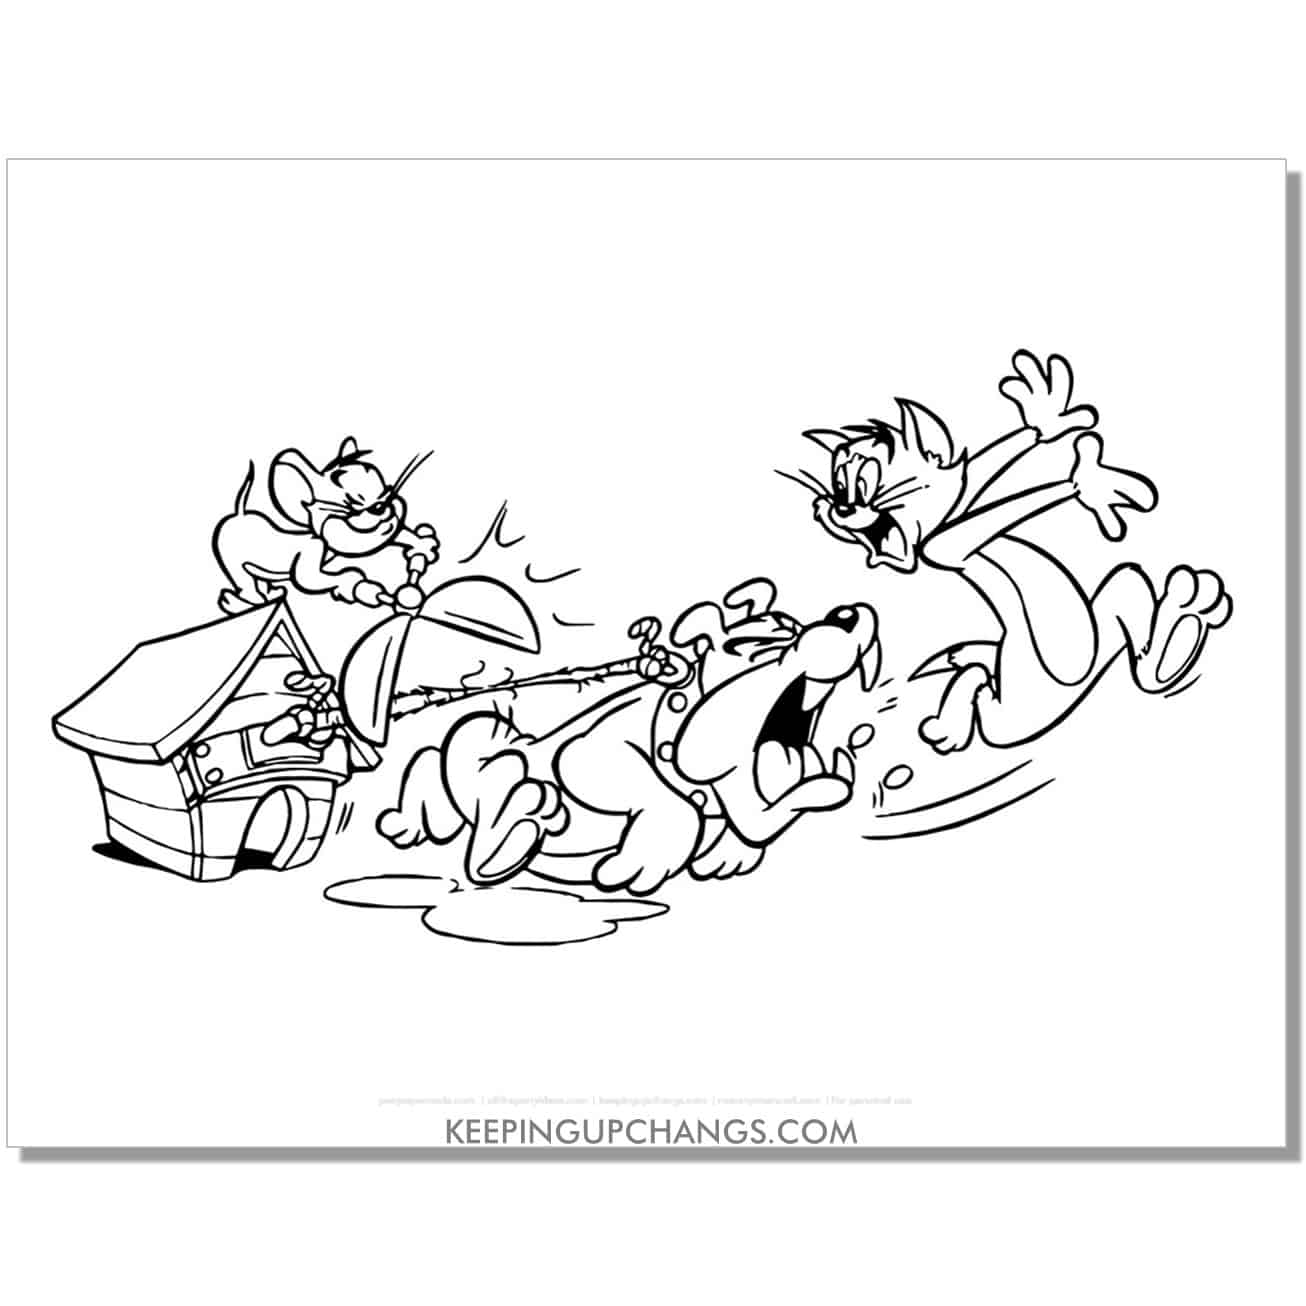 free tom and jerry chased by spike in doghouse coloring page.